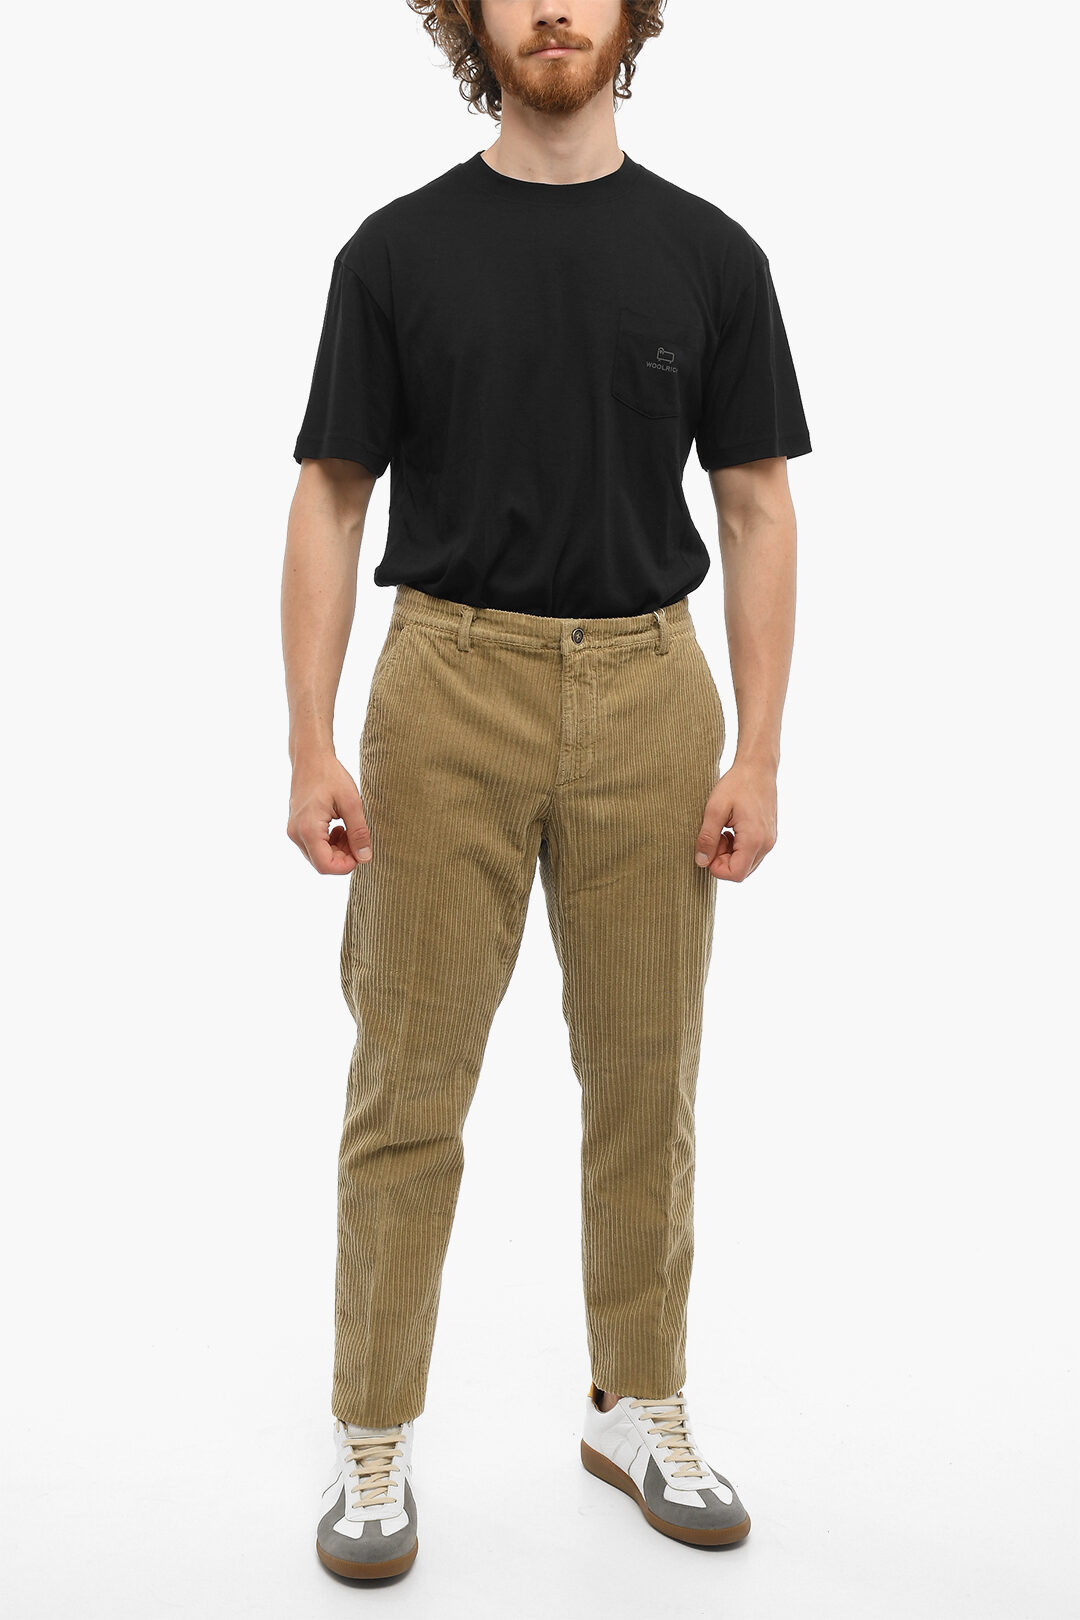 Woolrich PENN-RICH Corduroy Pants with Belt Loops men - Glamood Outlet